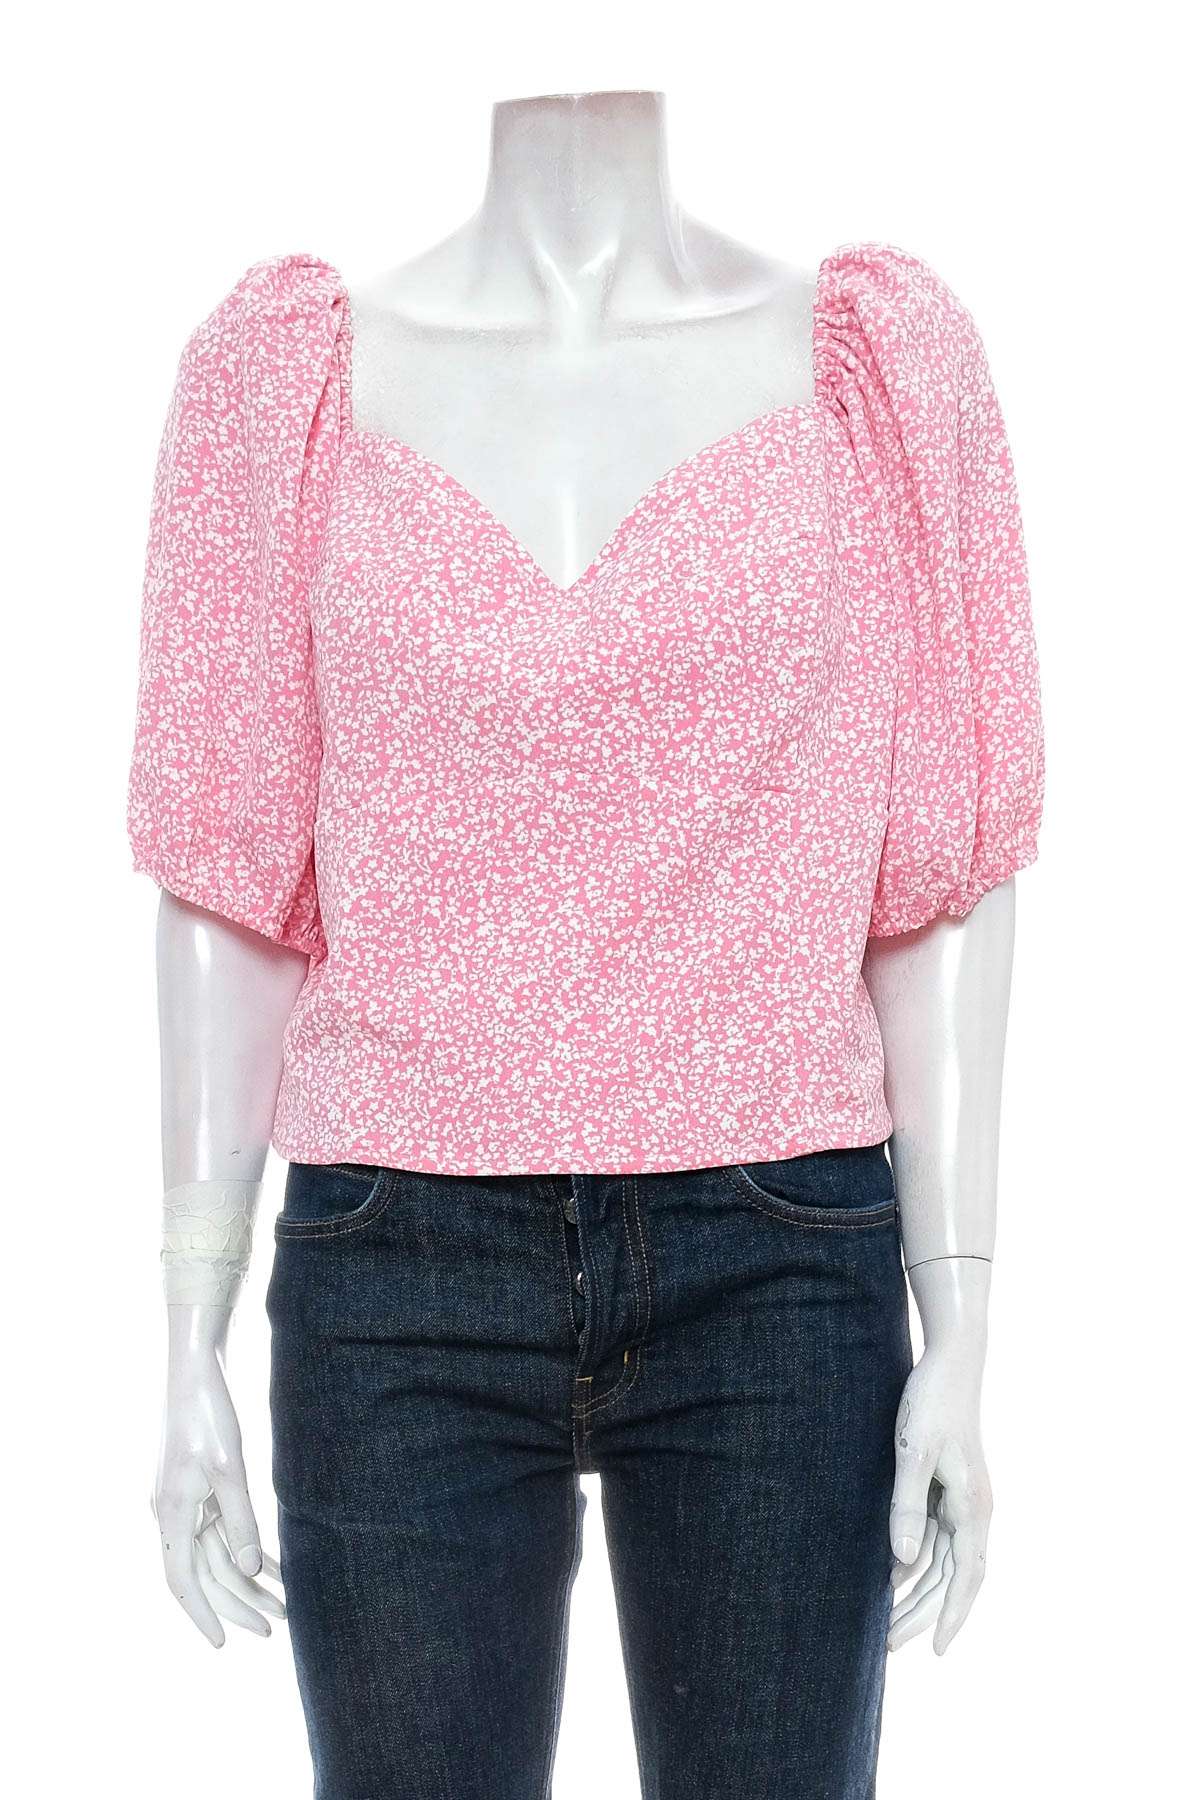 Women's shirt - Abercrombie & Fitch - 0